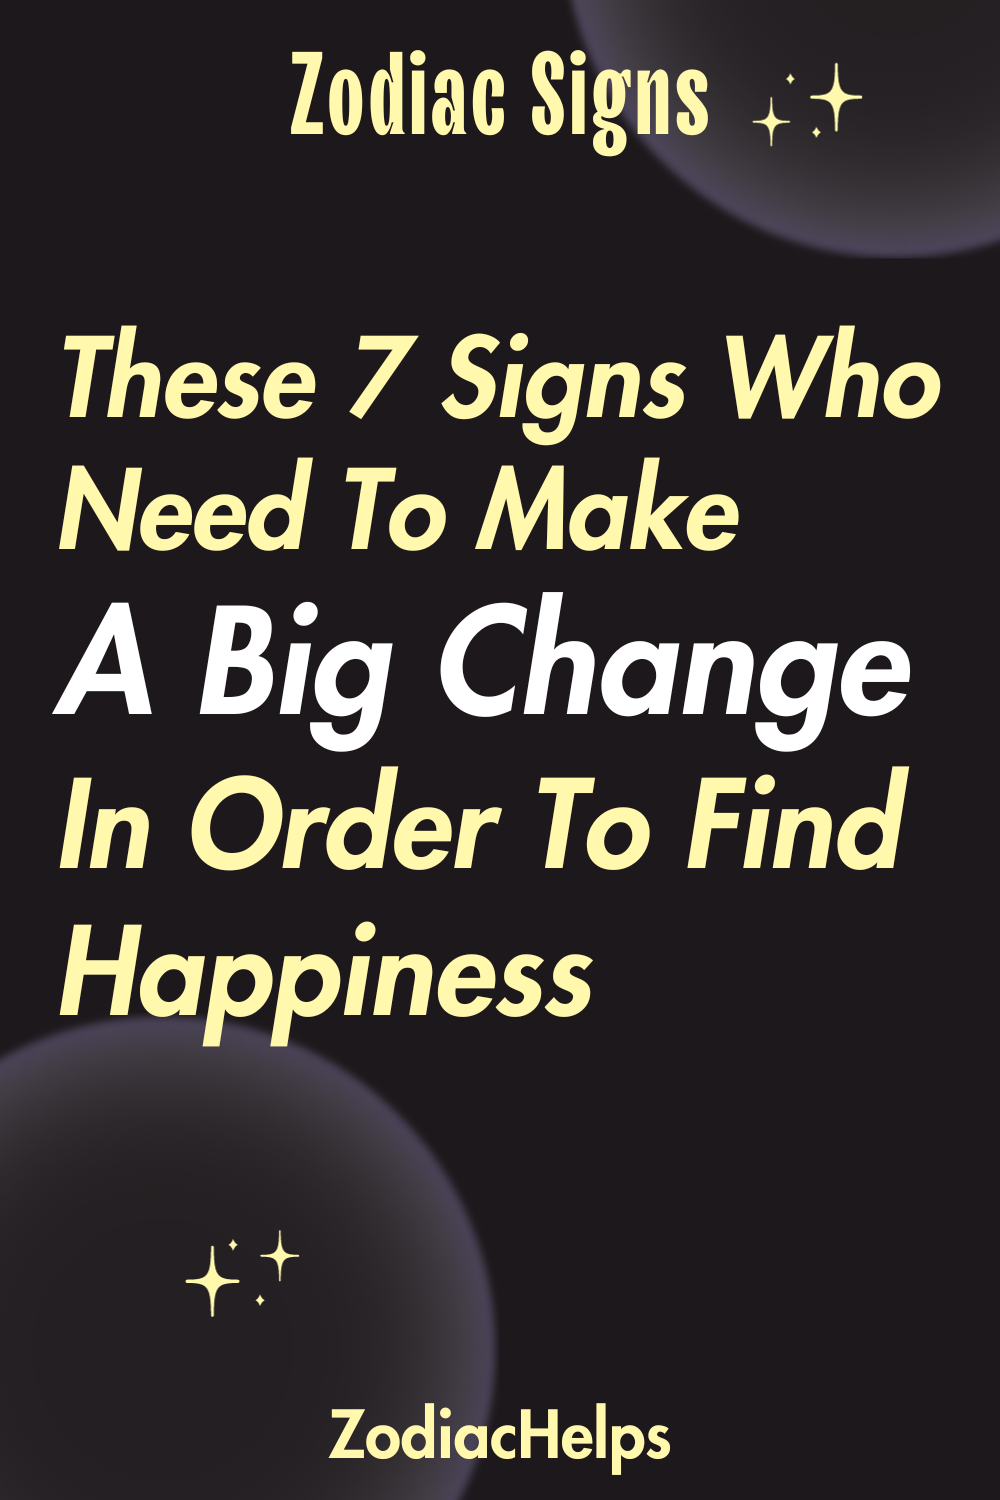 These 7 Signs Who Need To Make A Big Change In Order To Find Happiness